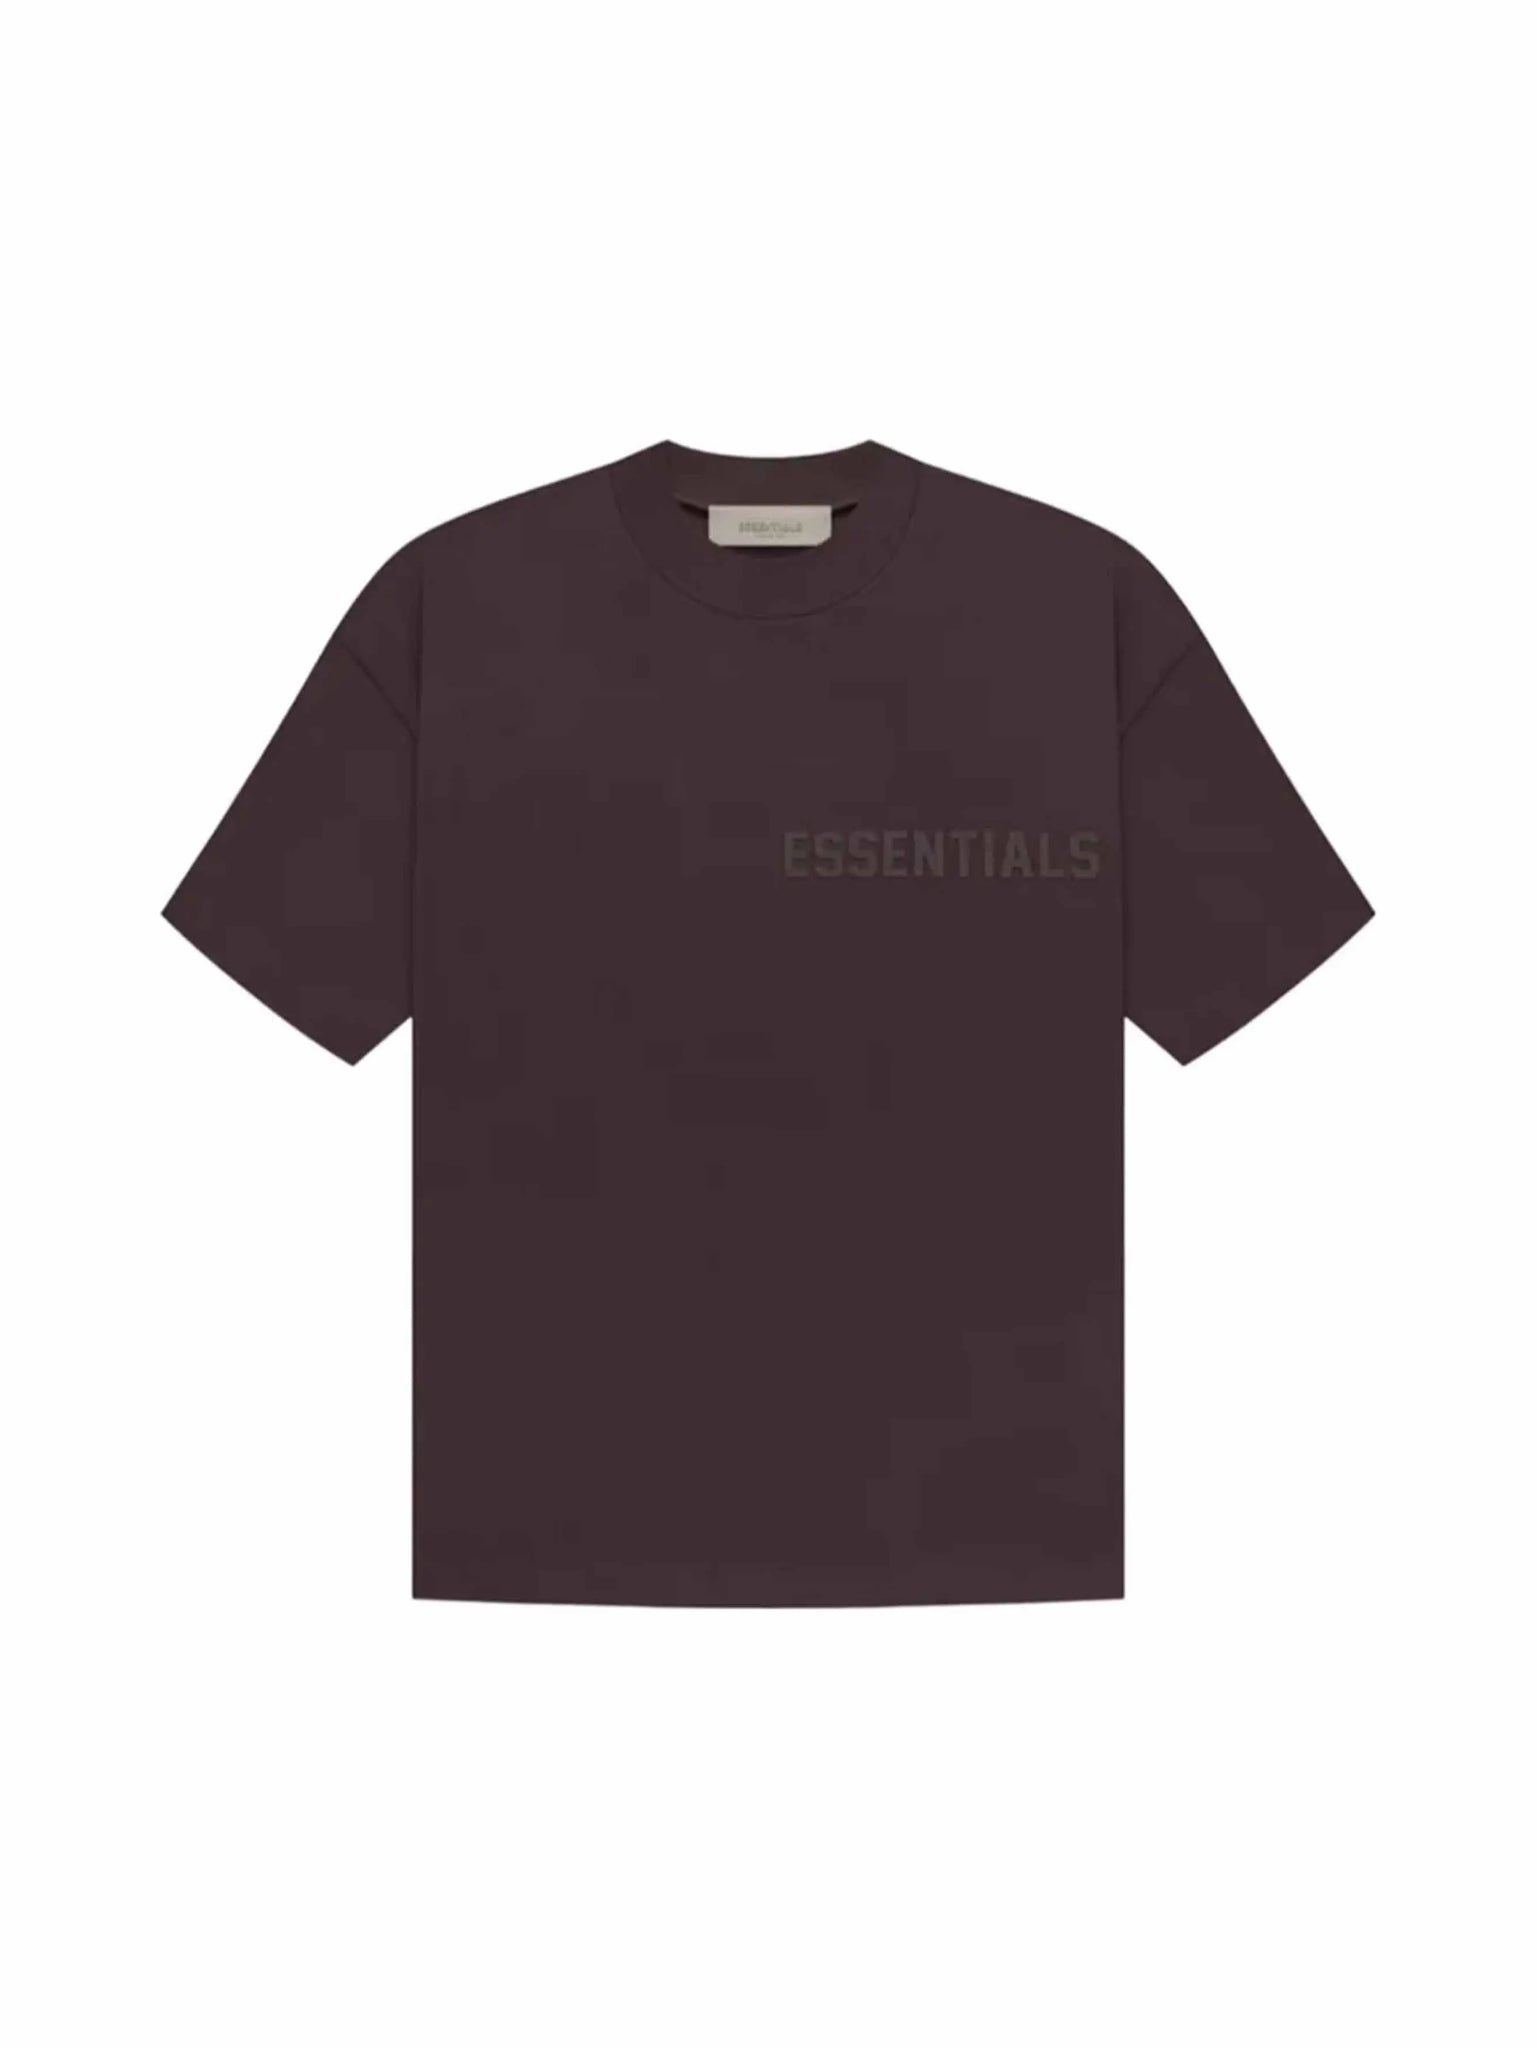 Fear of God Essentials SS Tee Plum in Auckland, New Zealand - Shop name